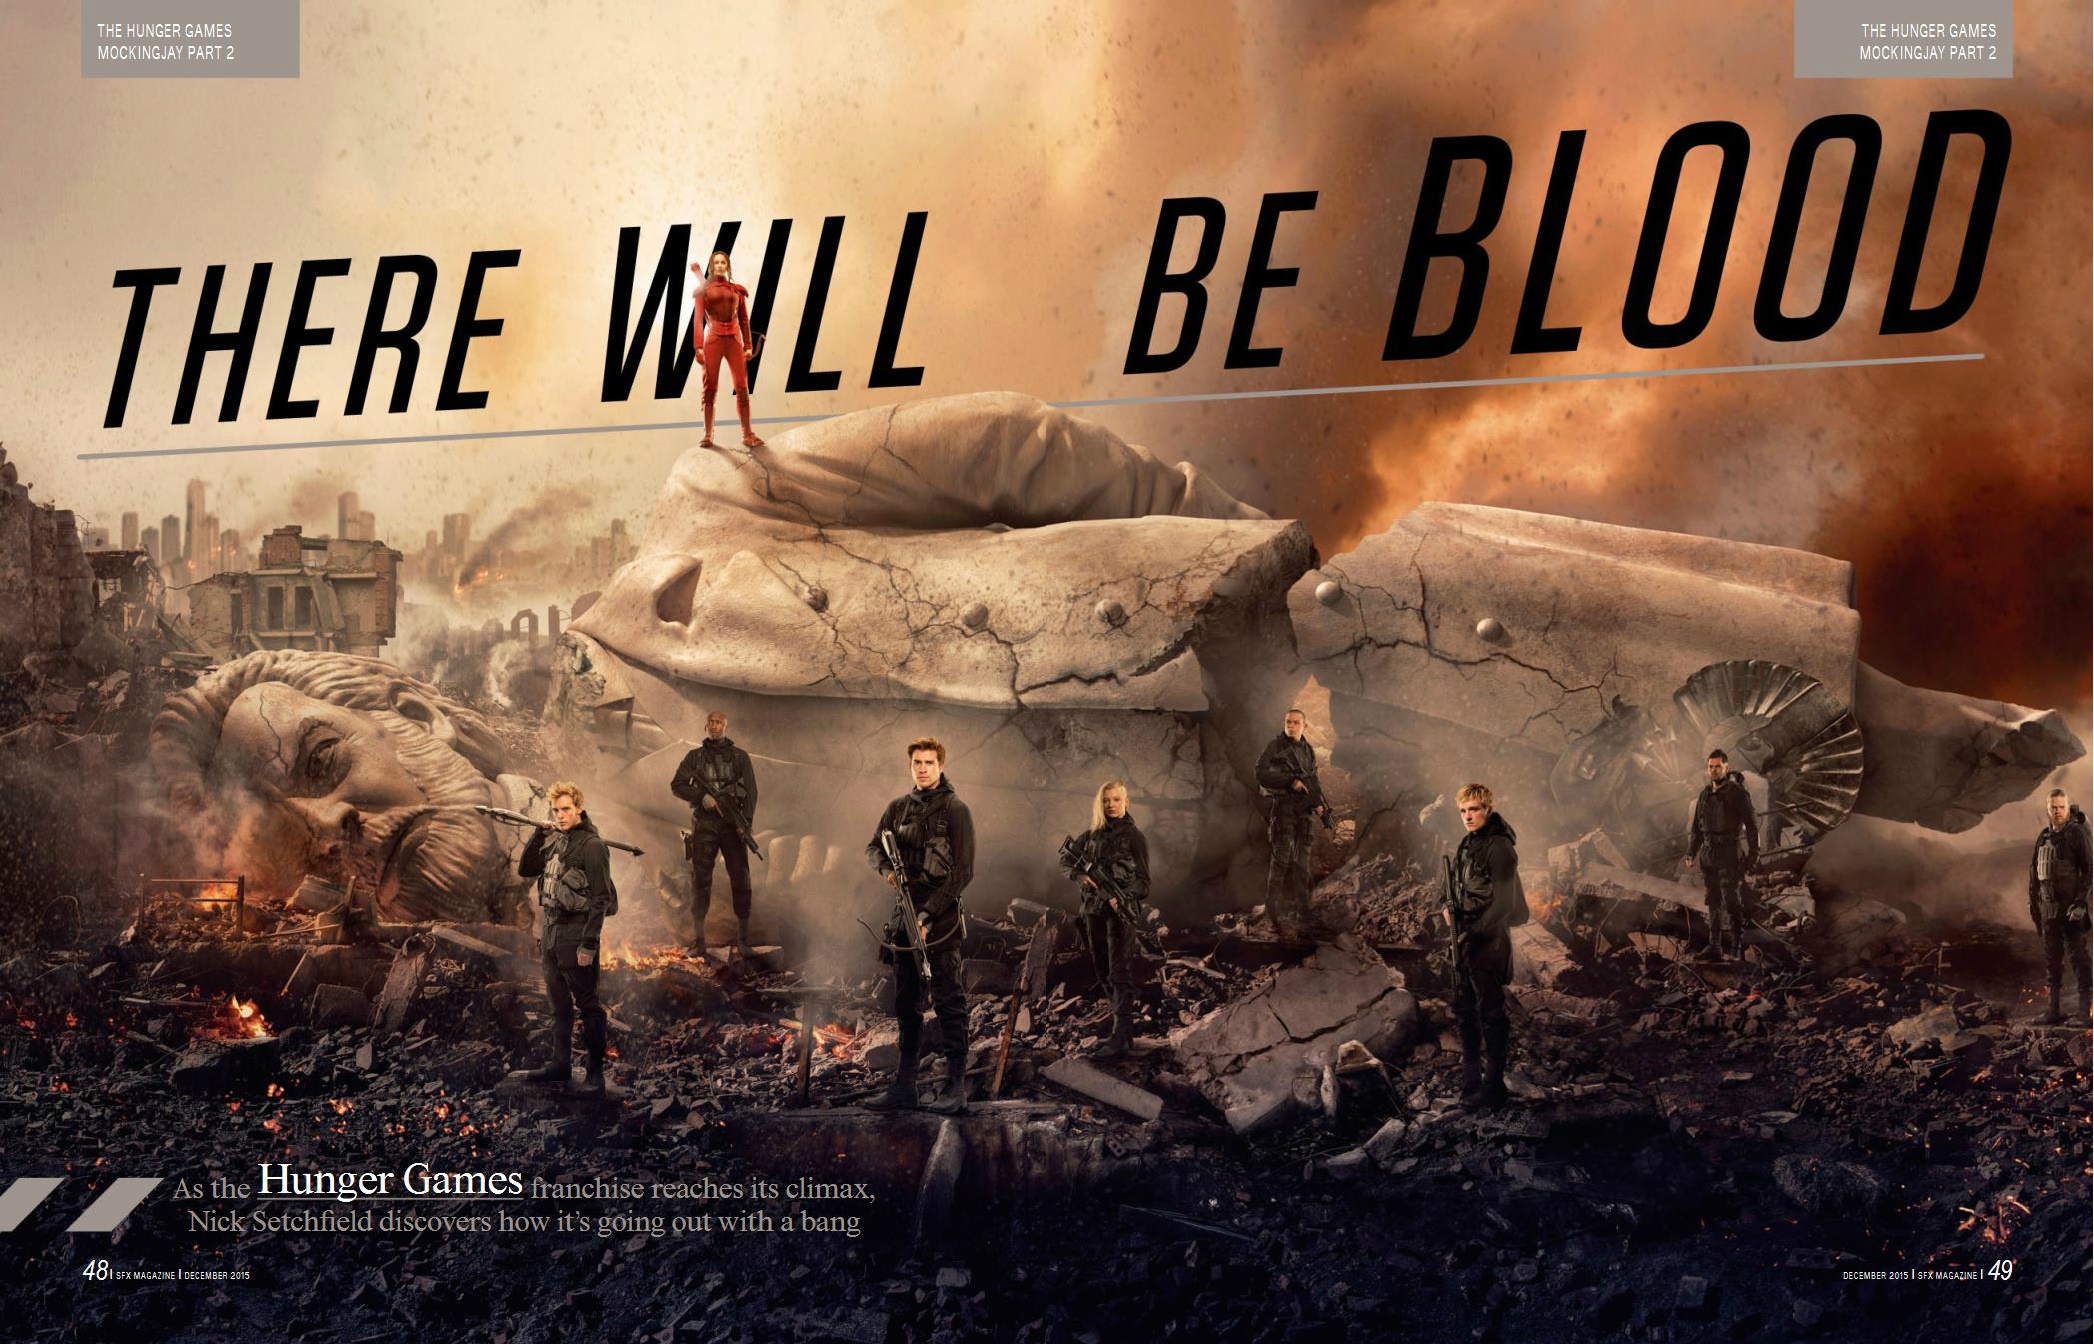 there will be blood wallpaper,movie,strategy video game,poster,battle,games